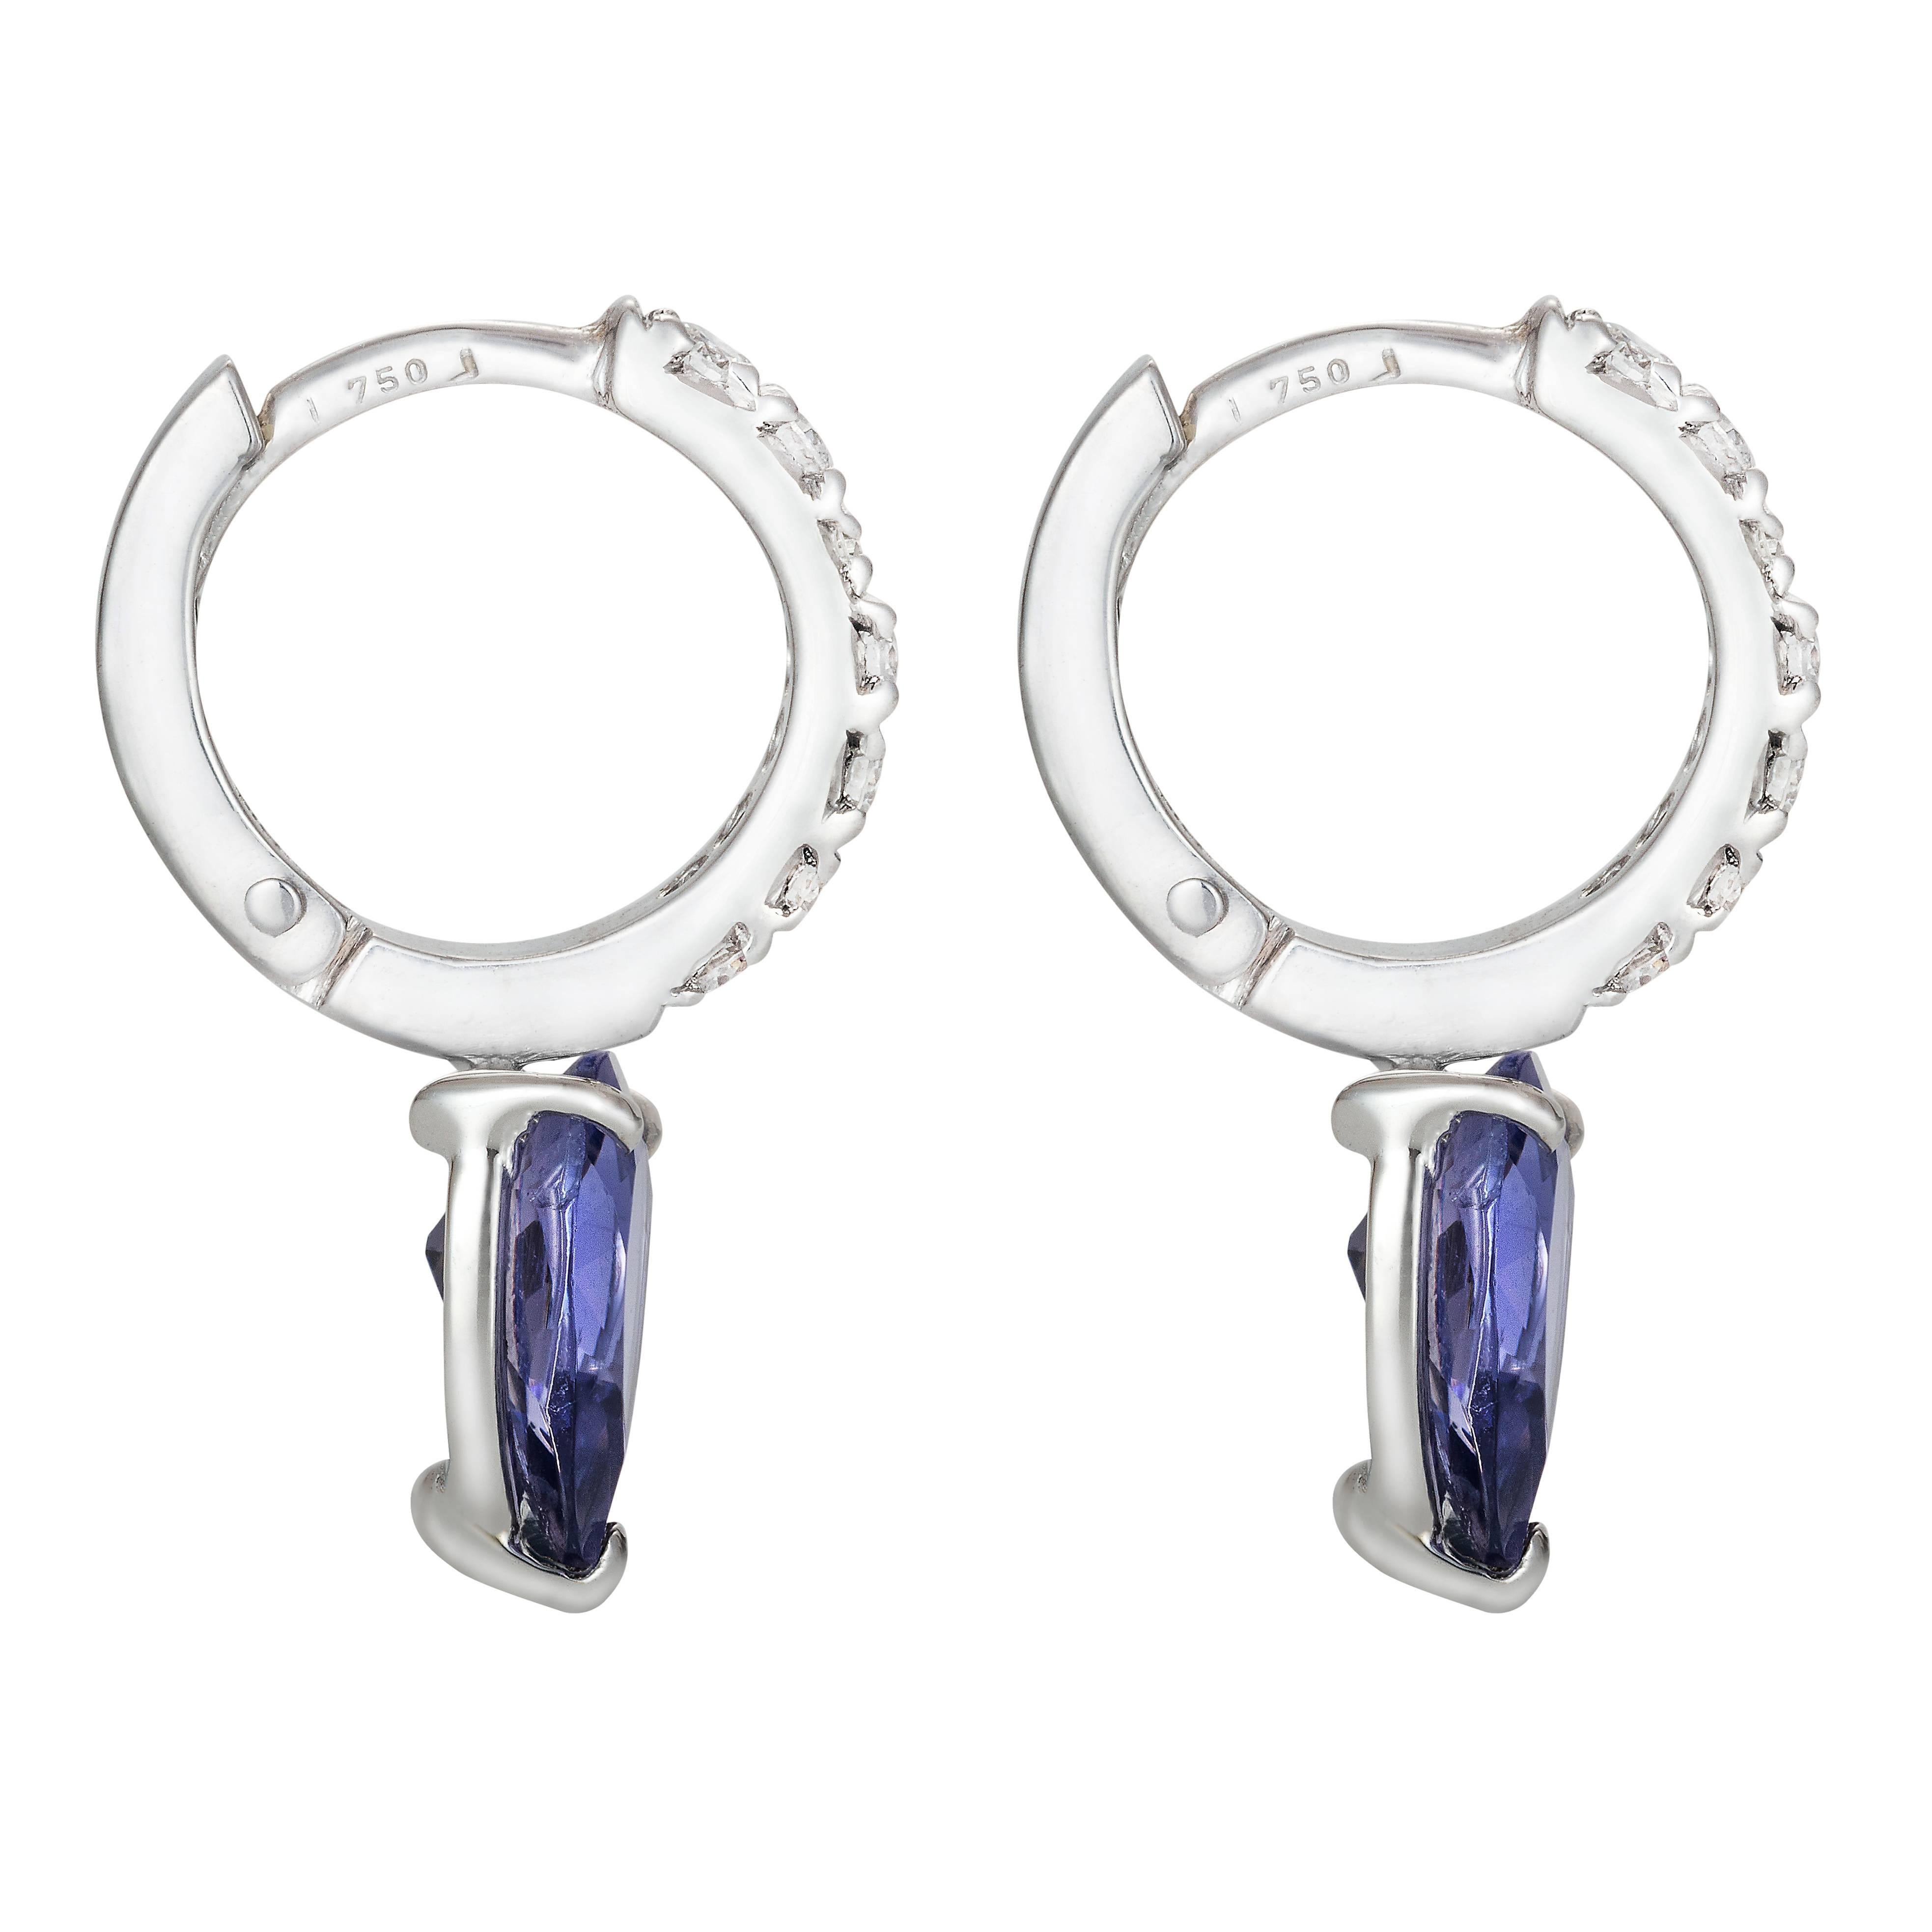 These DUBINI earrings from the 'Theodora' collection feature iolite drops with diamonds set in 18K white gold. 

…………………………………………………………………………………………………………………………………………………………………….

Inspired by Empress Theodora, wife of Justinian I, she was widely